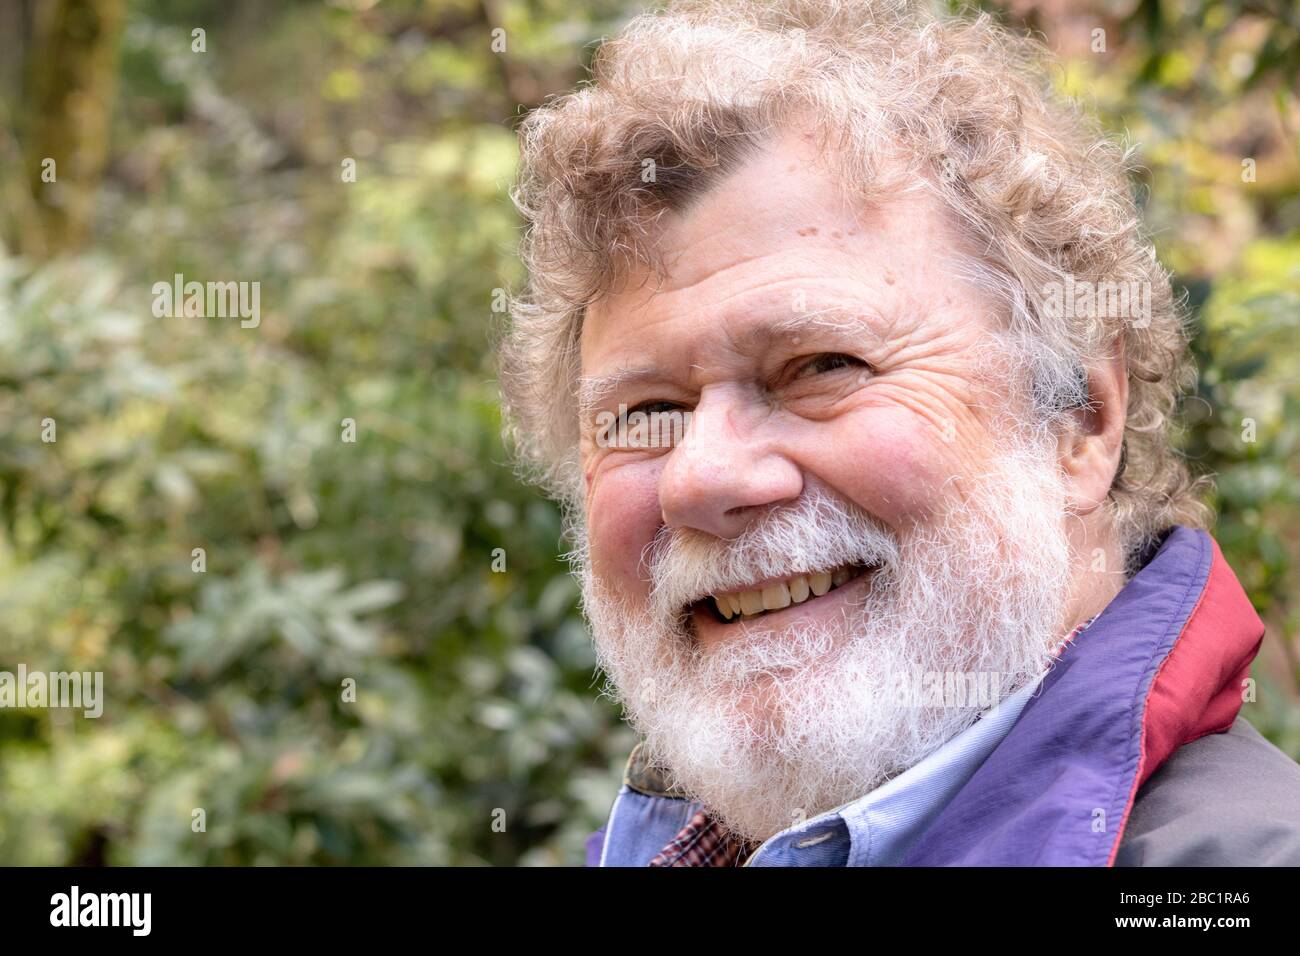 Friendly happy bearded senior male with a twinkle in his eye, a warm, kind healthy confident elderly man outside Stock Photo